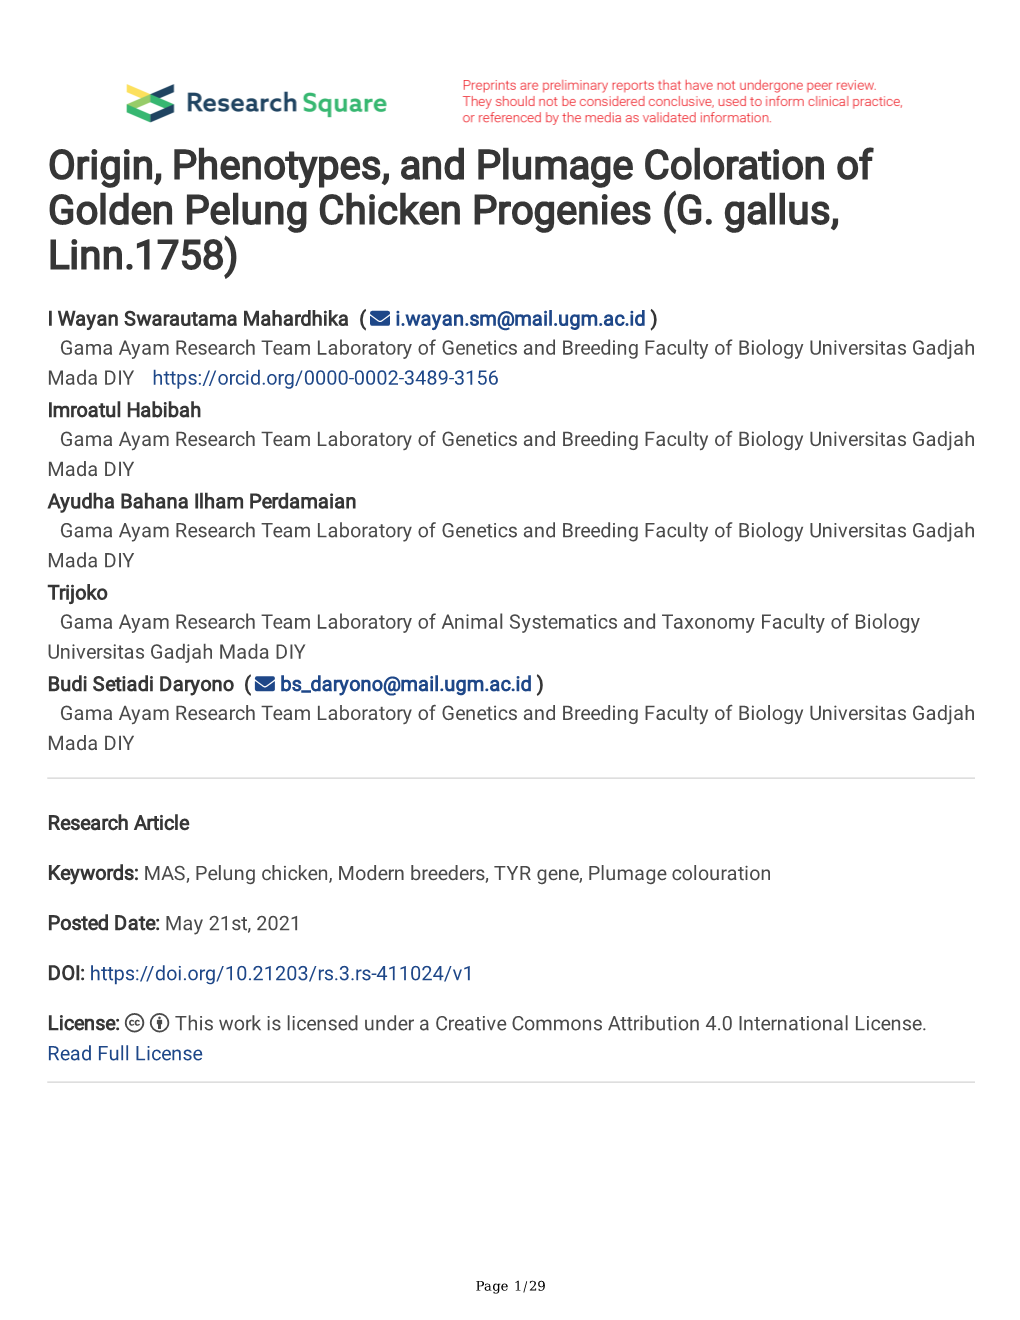 Origin, Phenotypes, and Plumage Coloration of Golden Pelung Chicken Progenies (G